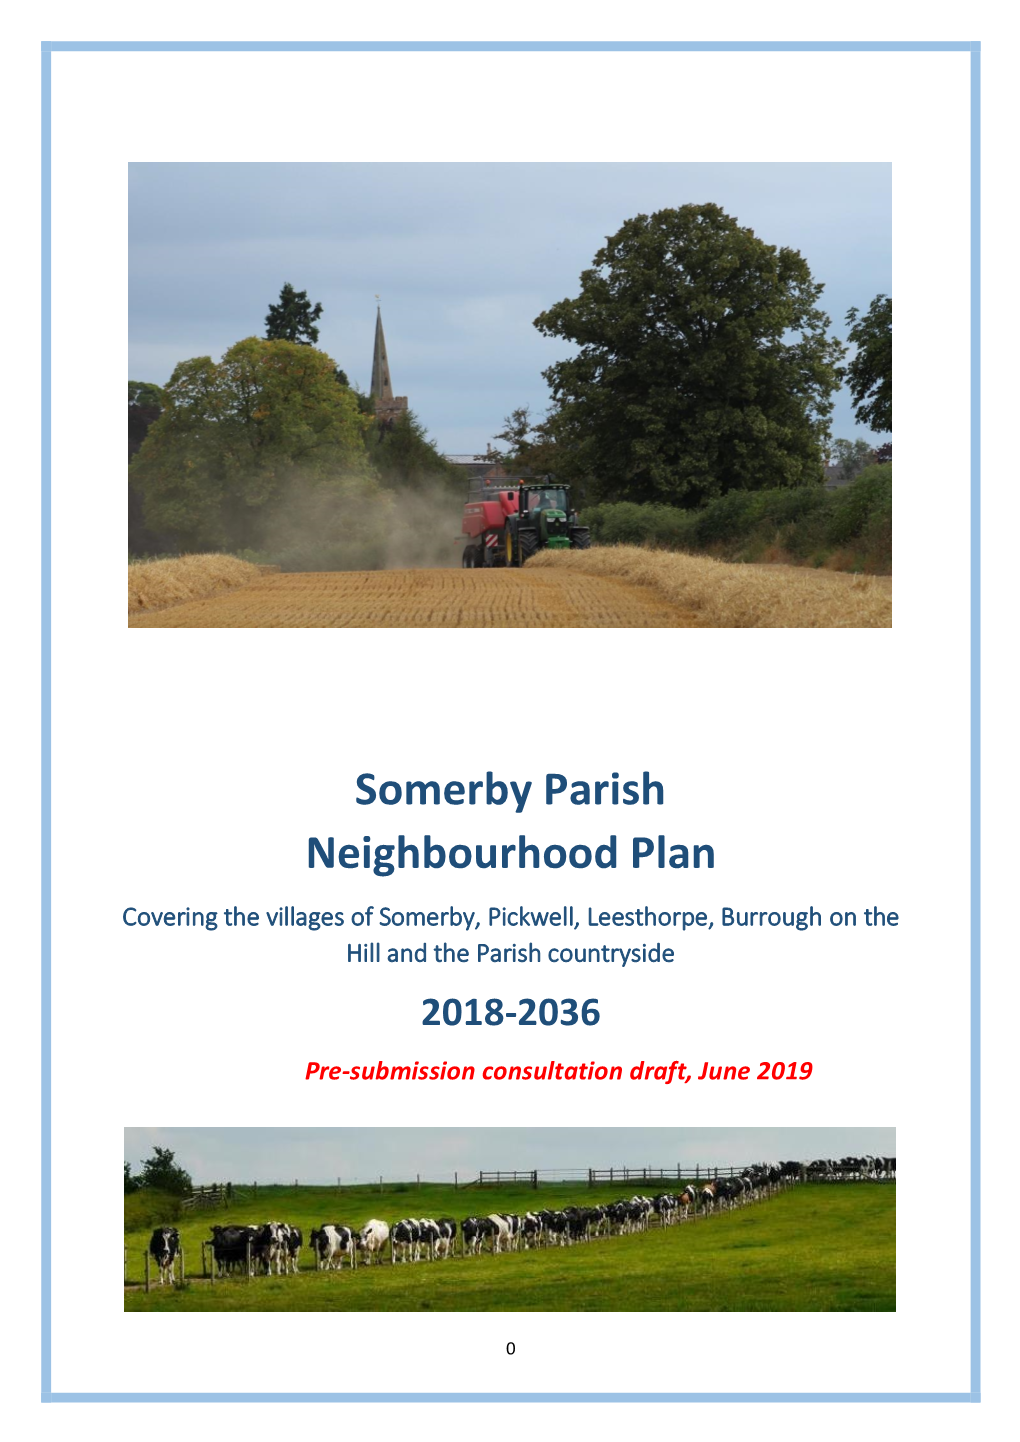 Somerby Parish Neighbourhood Plan Covering the Villages of Somerby, Pickwell, Leesthorpe, Burrough on the Hill and the Parish Countryside 2018-2036